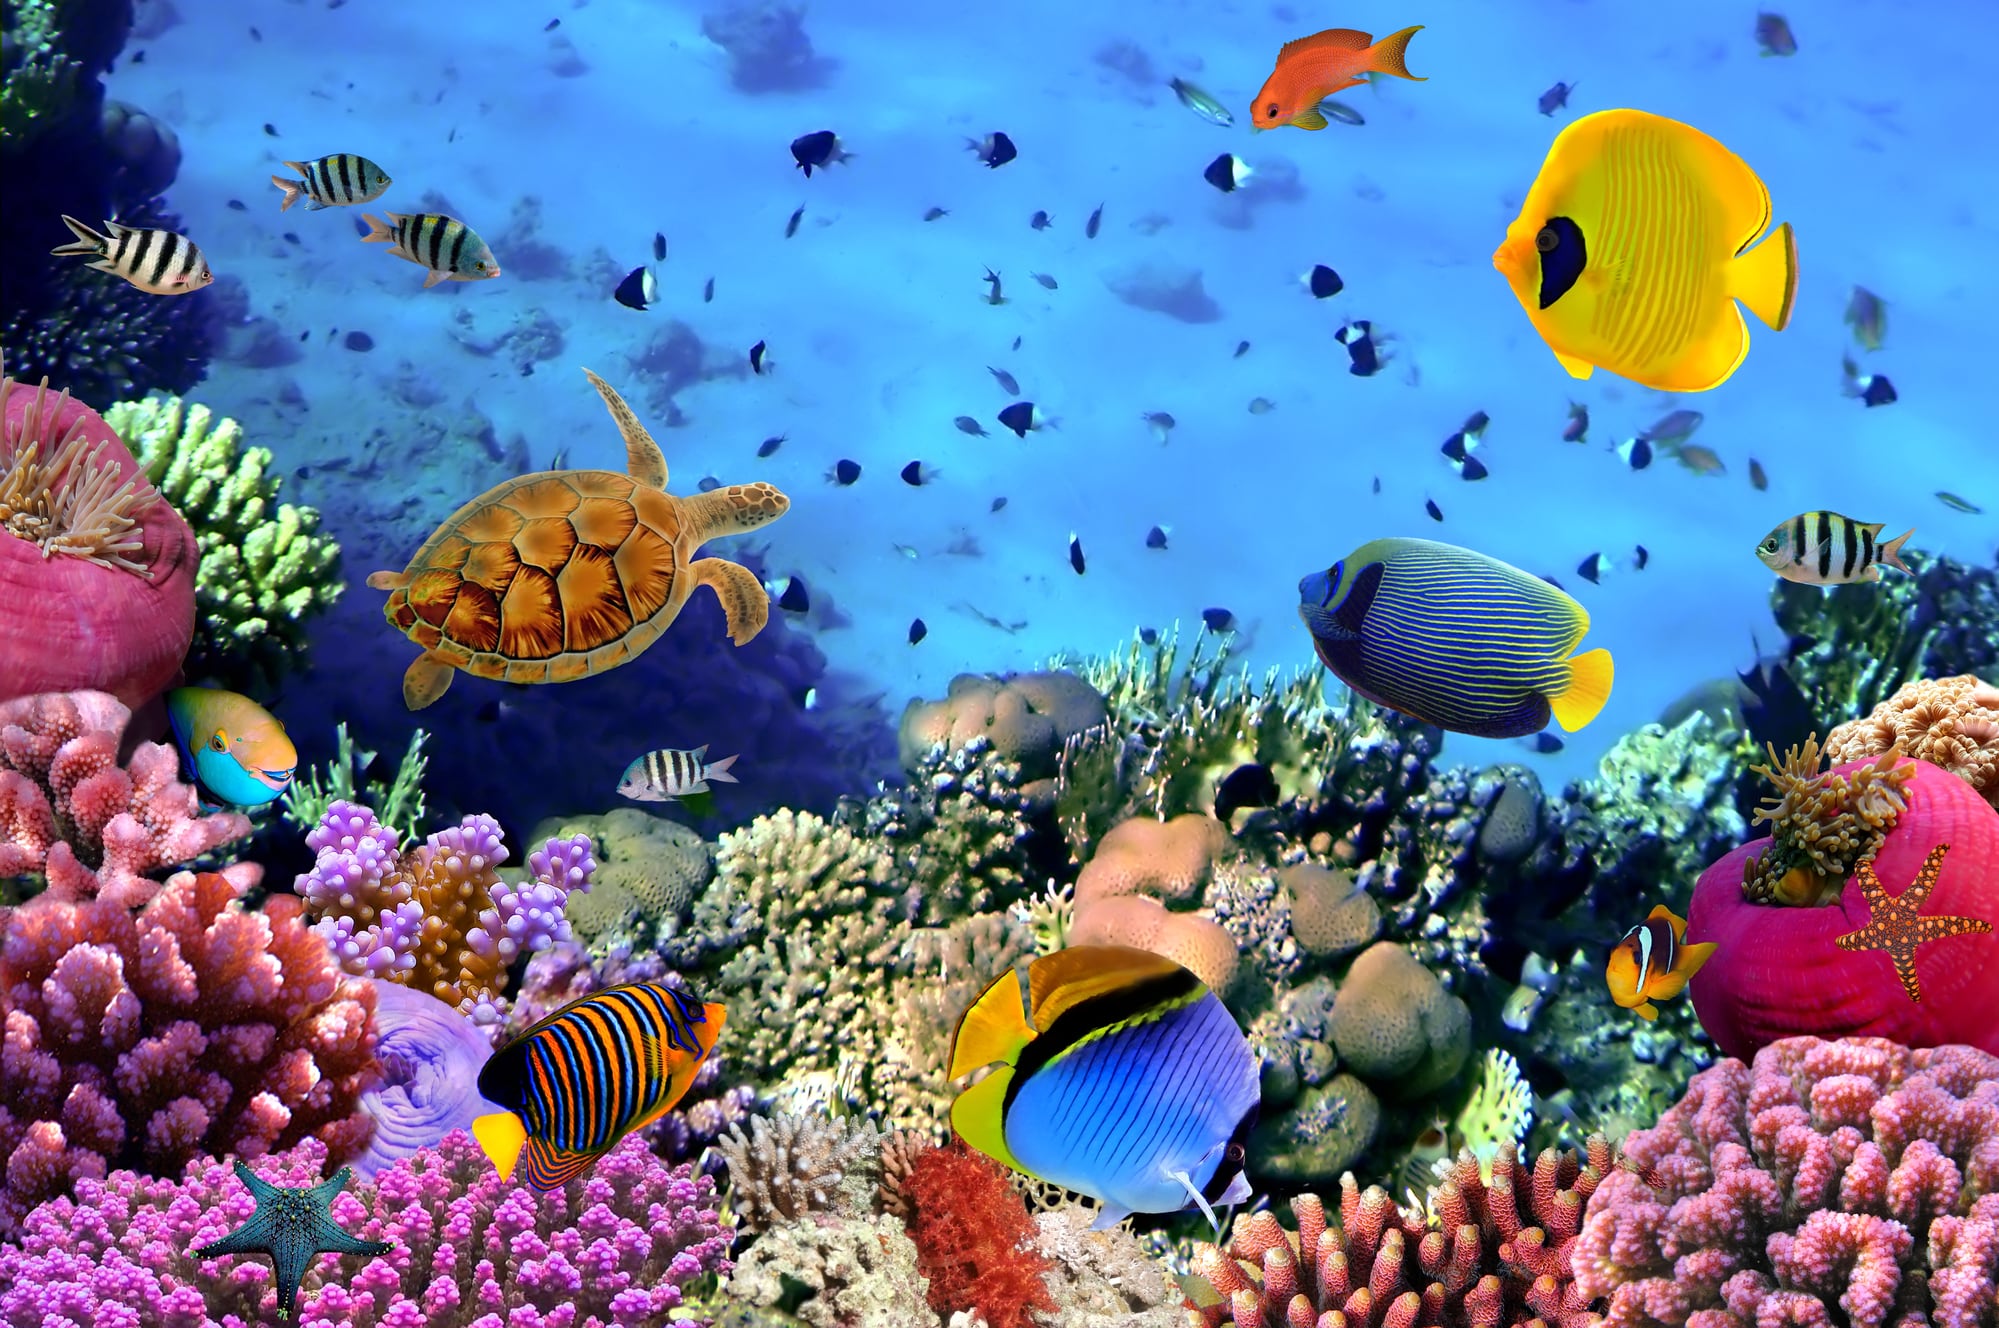 A very colorful coral reef scene with many species of tropical fish.